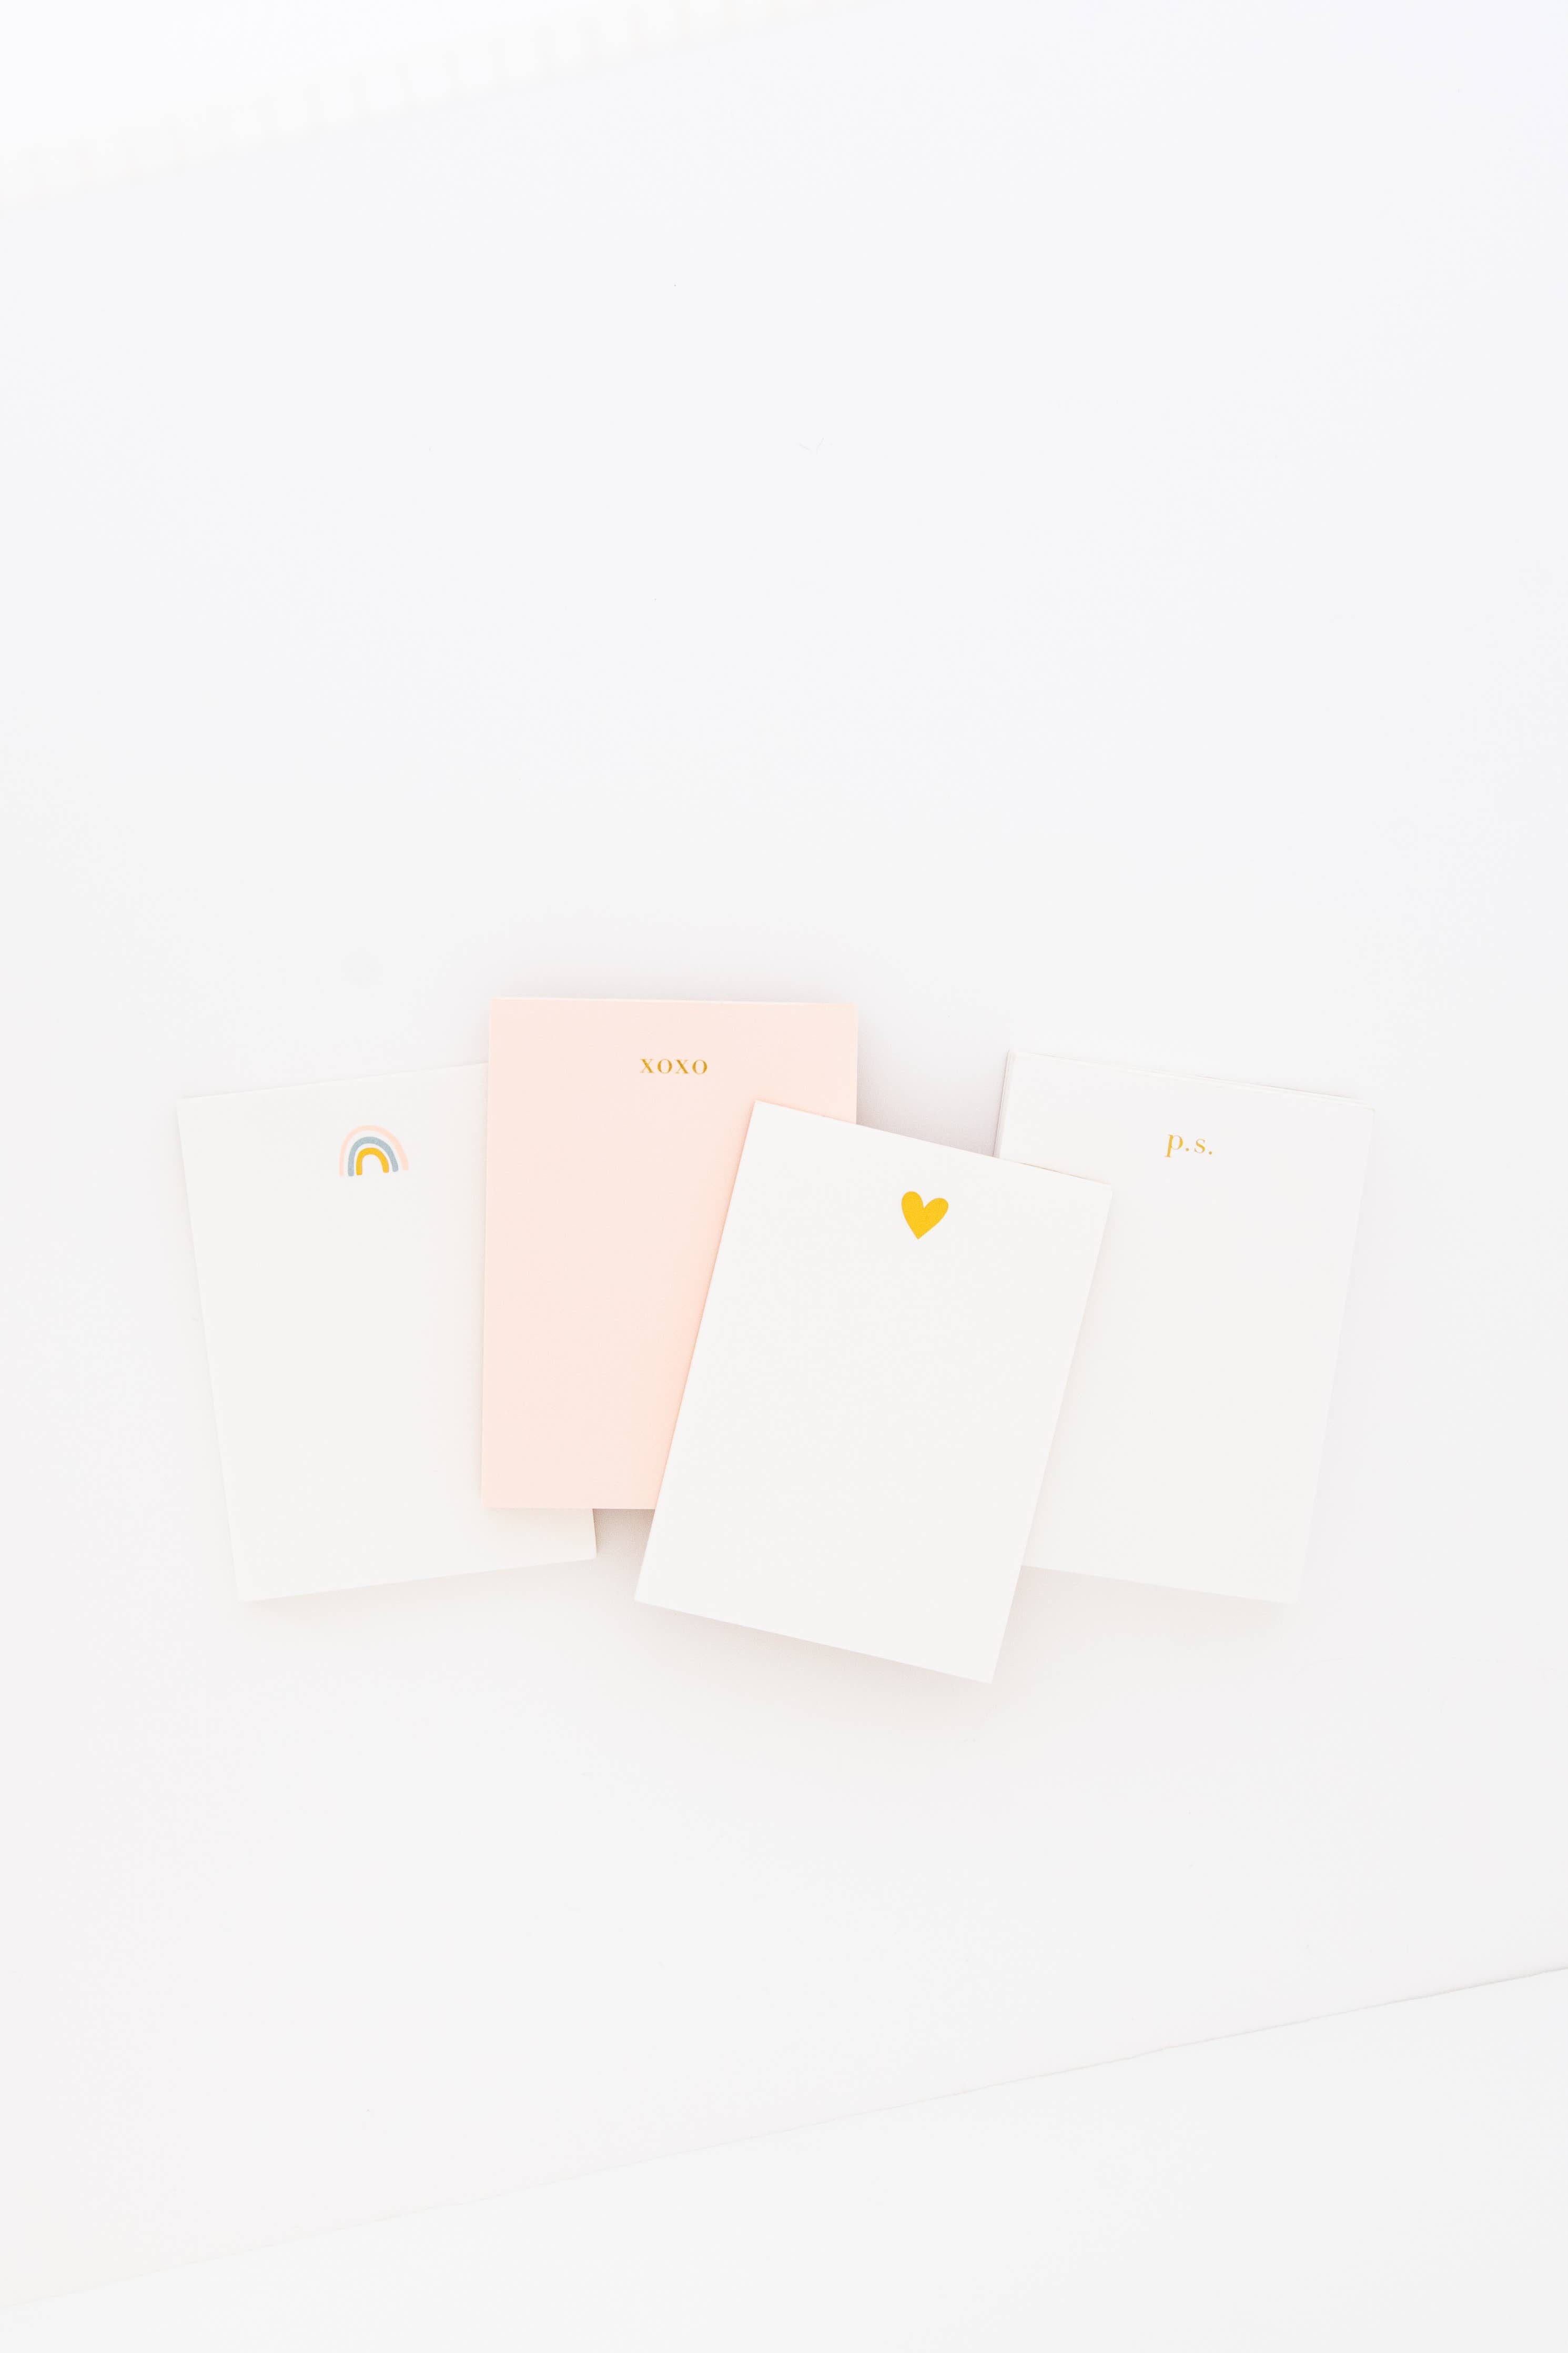 Stack of notebooks with gold heart design on top notebook.